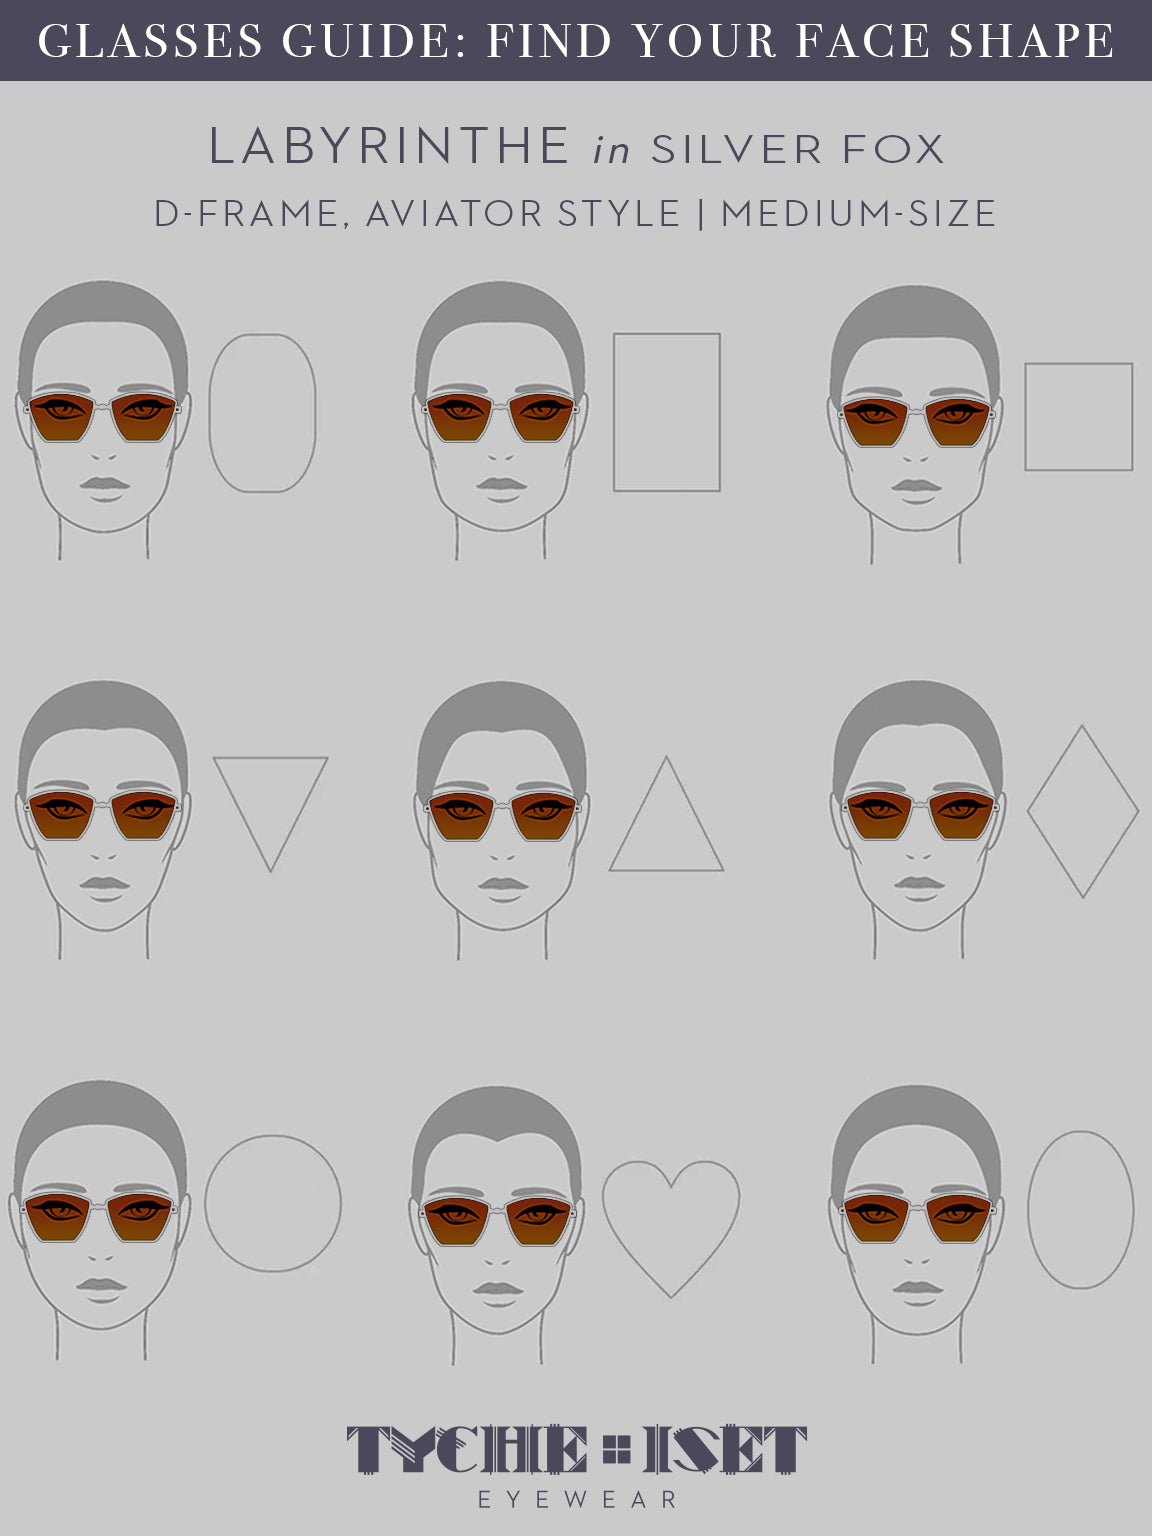 FACE SHAPE SUNGLASSES GUIDE, EYEWEAR FACE SHAPE GUIDE, Lightweight titanium glasses, strong titanium sunglasses, sunglasses & optical, luxury eyewear, mazzucchelli italian acetate, made in japan, mythology, eyewear designer, woman owned small business, summer accessories, chic style, celebrity style, aviator glasses, d-frame eyewear, cat eye sunglasses, art deco, geometric art, SILVER glasses